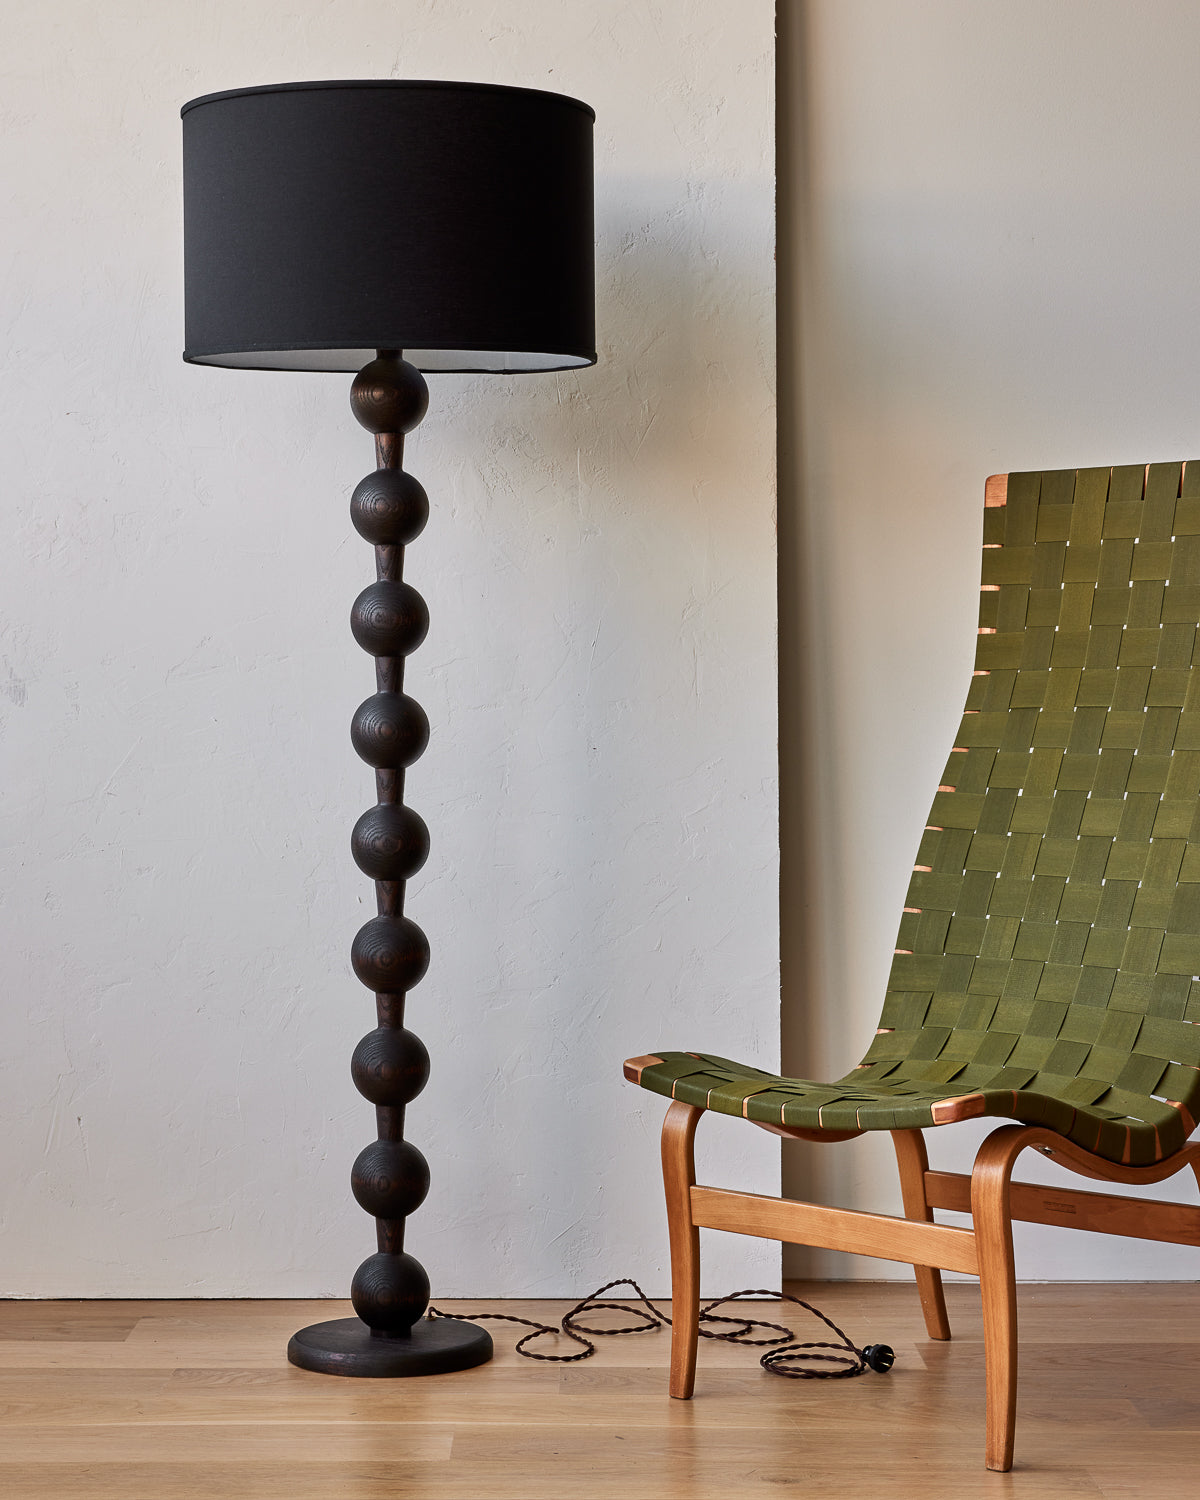 Tall sculptural solid wood floor lamp with barbell design in dark wash finish with black linen drum shade